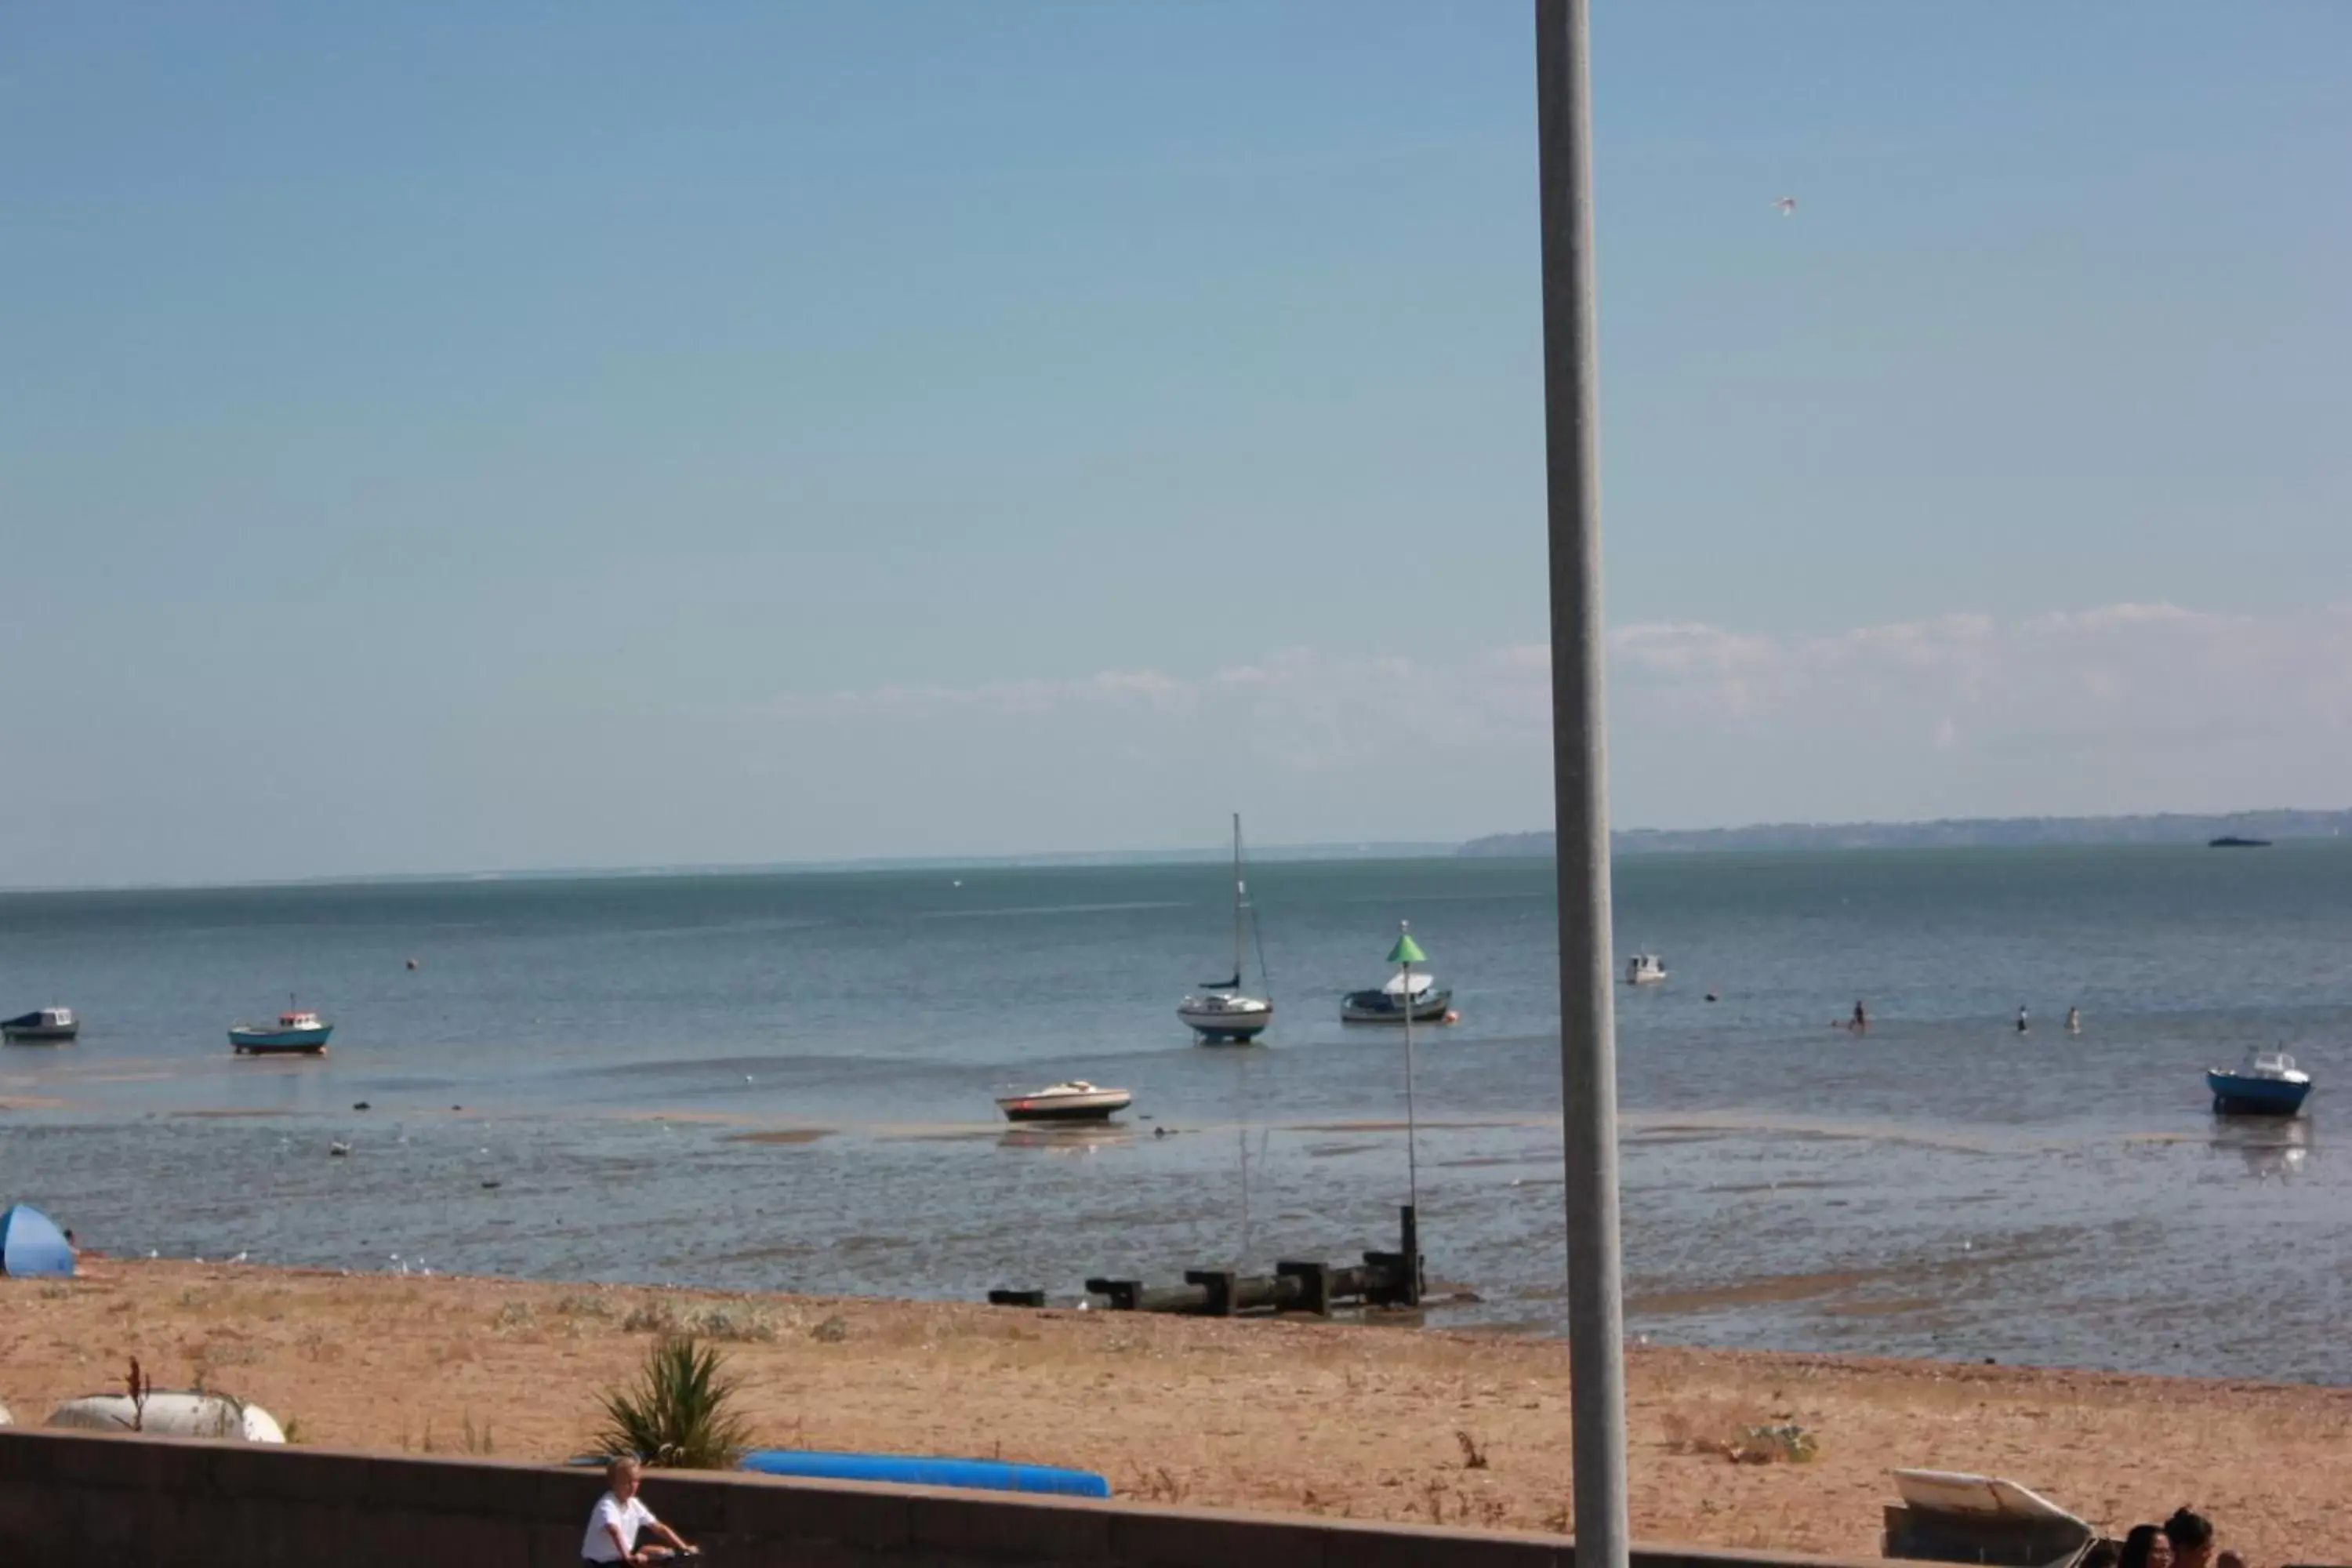 Beach in Wns Southend -on-Sea